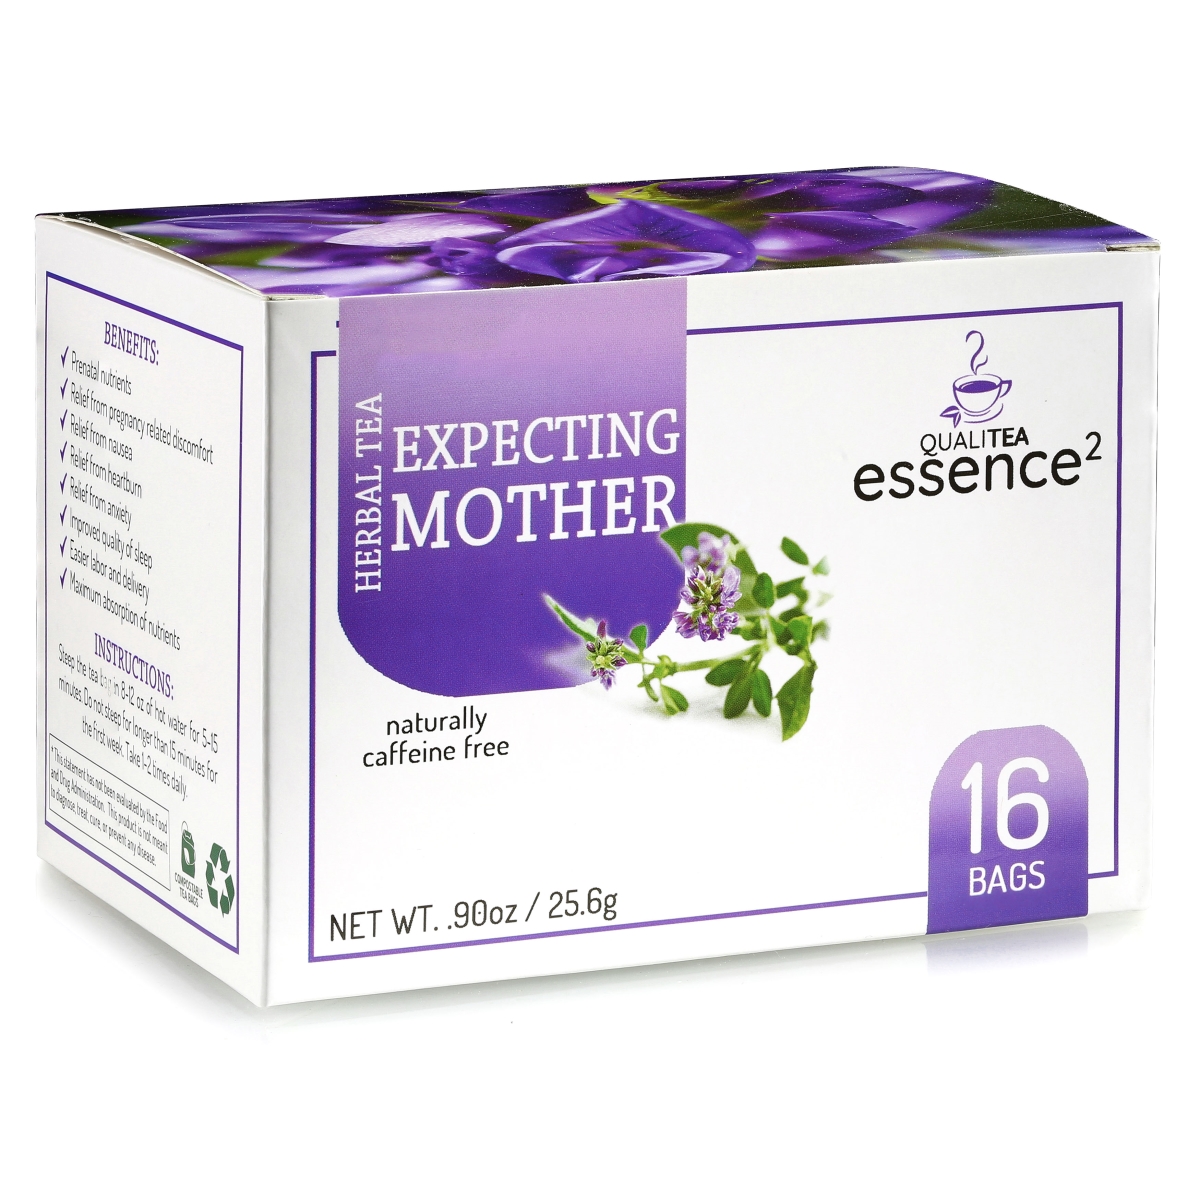 Picture of Qualitea Essence 2 789185572839 Herbal Tea for the Expecting Mother Caffeine Free